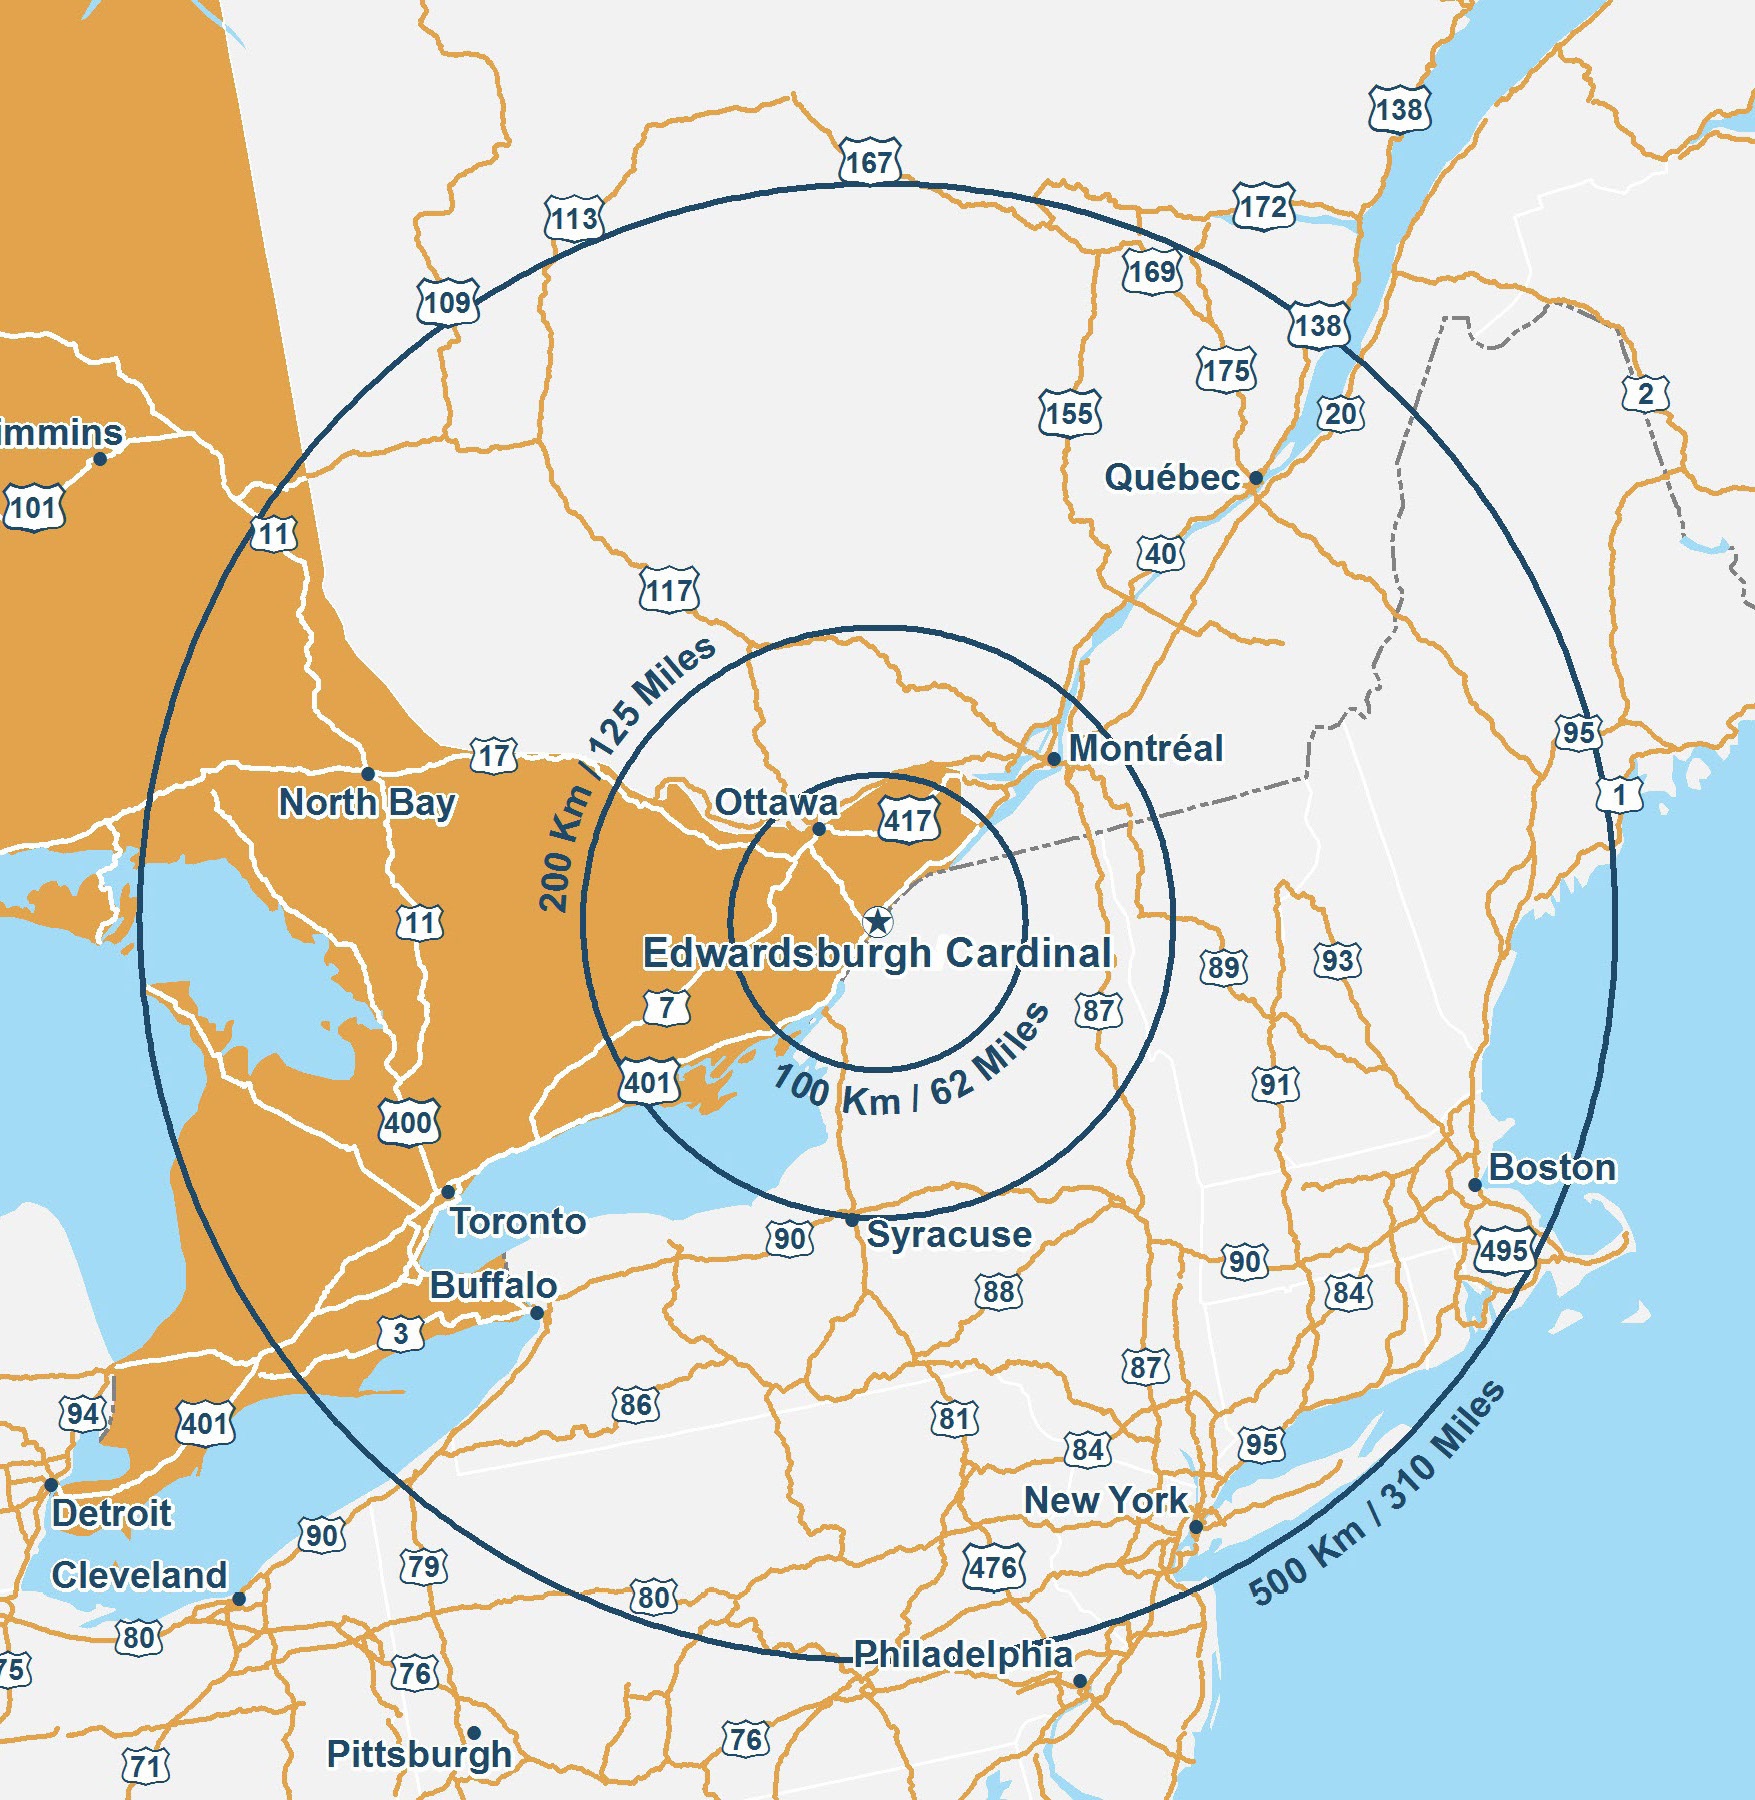 Map showing Edwardsburgh Cardinal at the centre surrounded by three circles representing a radius of 100 km/62 miles, a radius of 200 km/125 miles and a radius of 500 km/310 miles. It is shown that Ottawa is within 100 km/62 miles from Edwardsburgh Cardinal, Montreal is within 200 km/125 miles, North Bay, Toronto, Buffalo, Syracuse, Boston and Quebec City are within 500 km/310 miles and Philadelphia, Pittsburgh, Detroit and Cleveland are just beyond 500 km/310 miles from Edwardsburgh Cardinal.